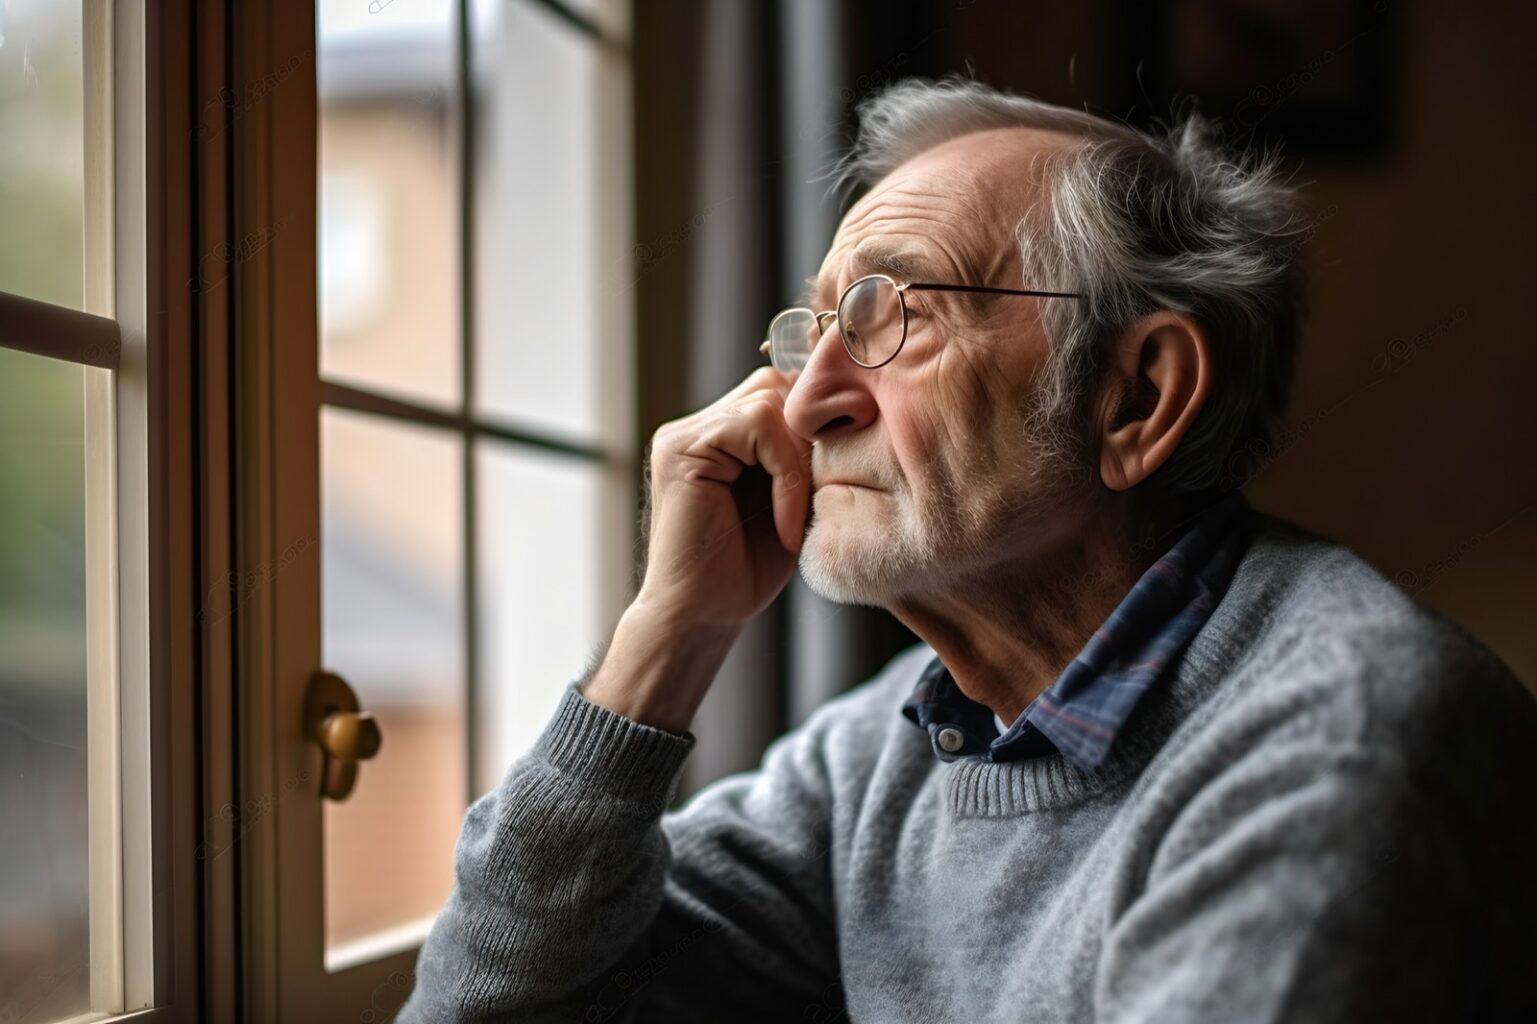 Sad elderly man looking out the window